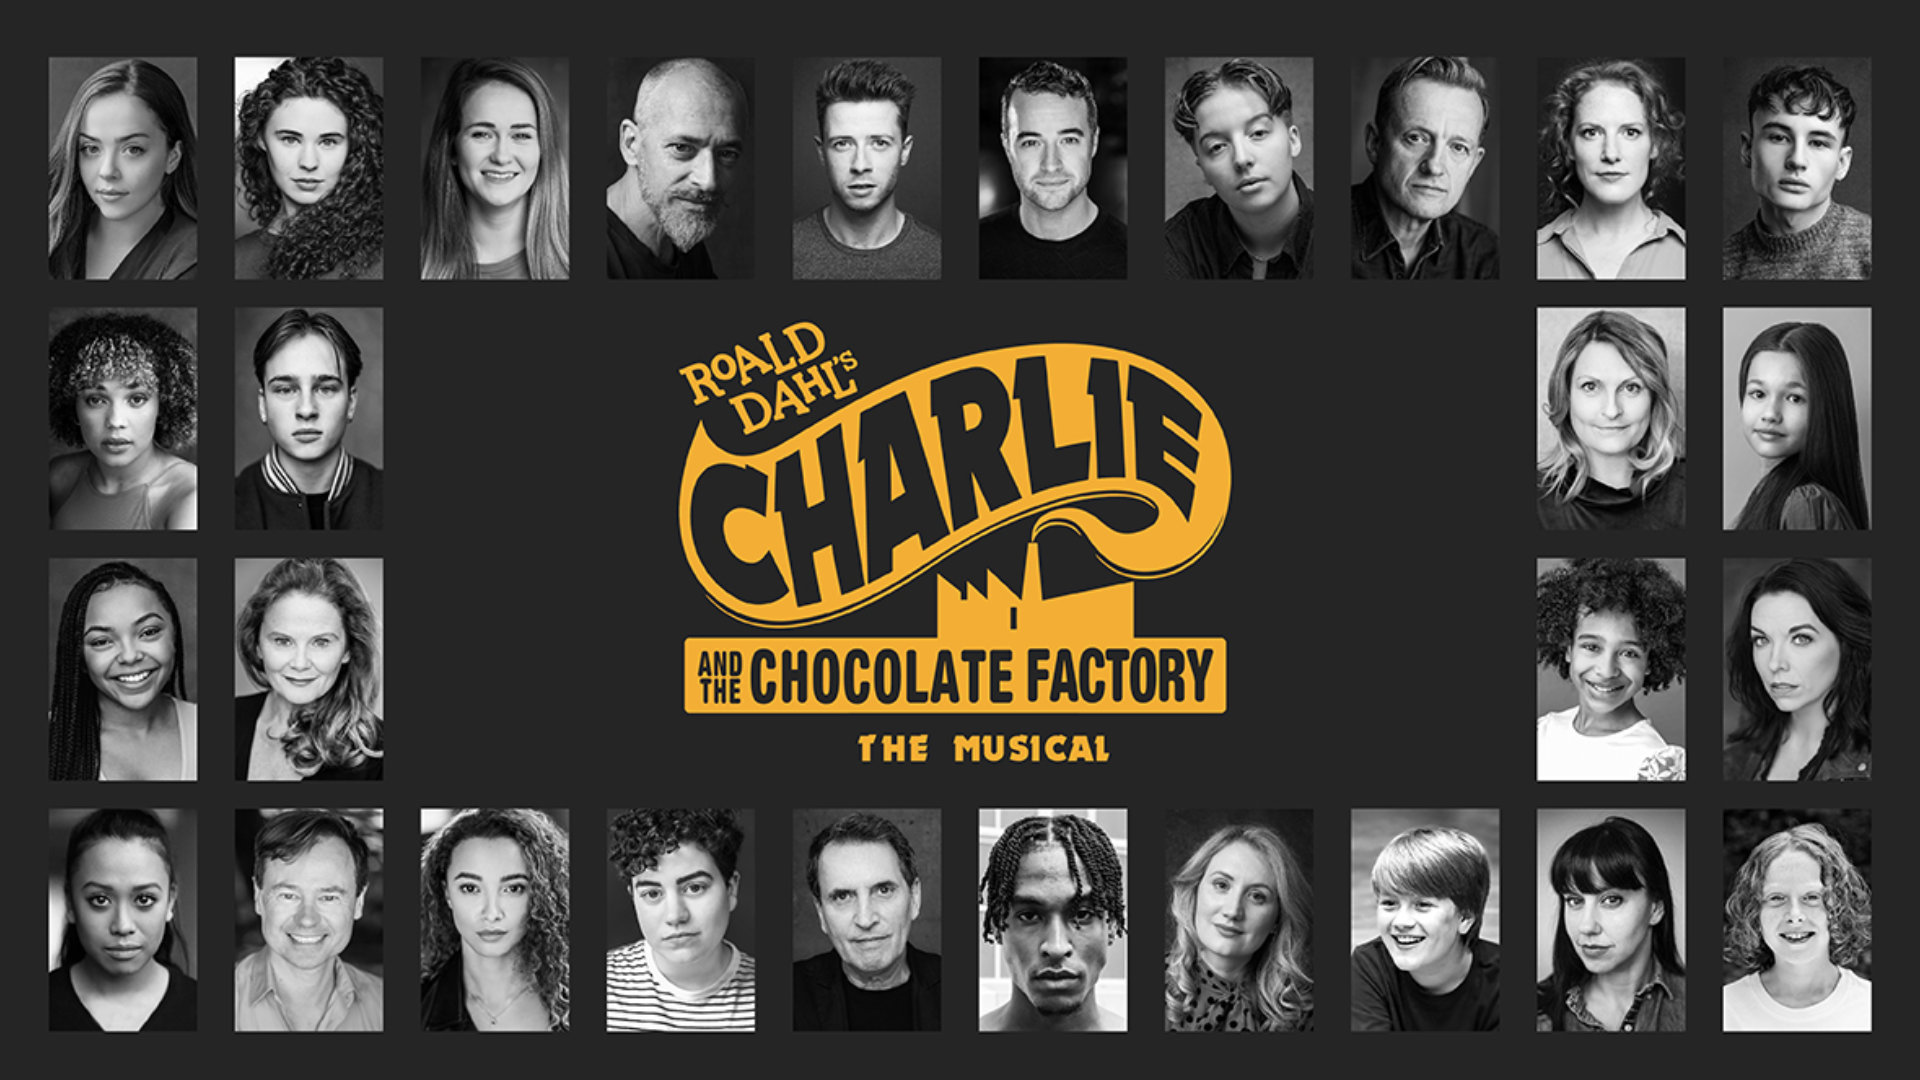 Charlie and the Chocolate Factory cast announced for tour and Leeds